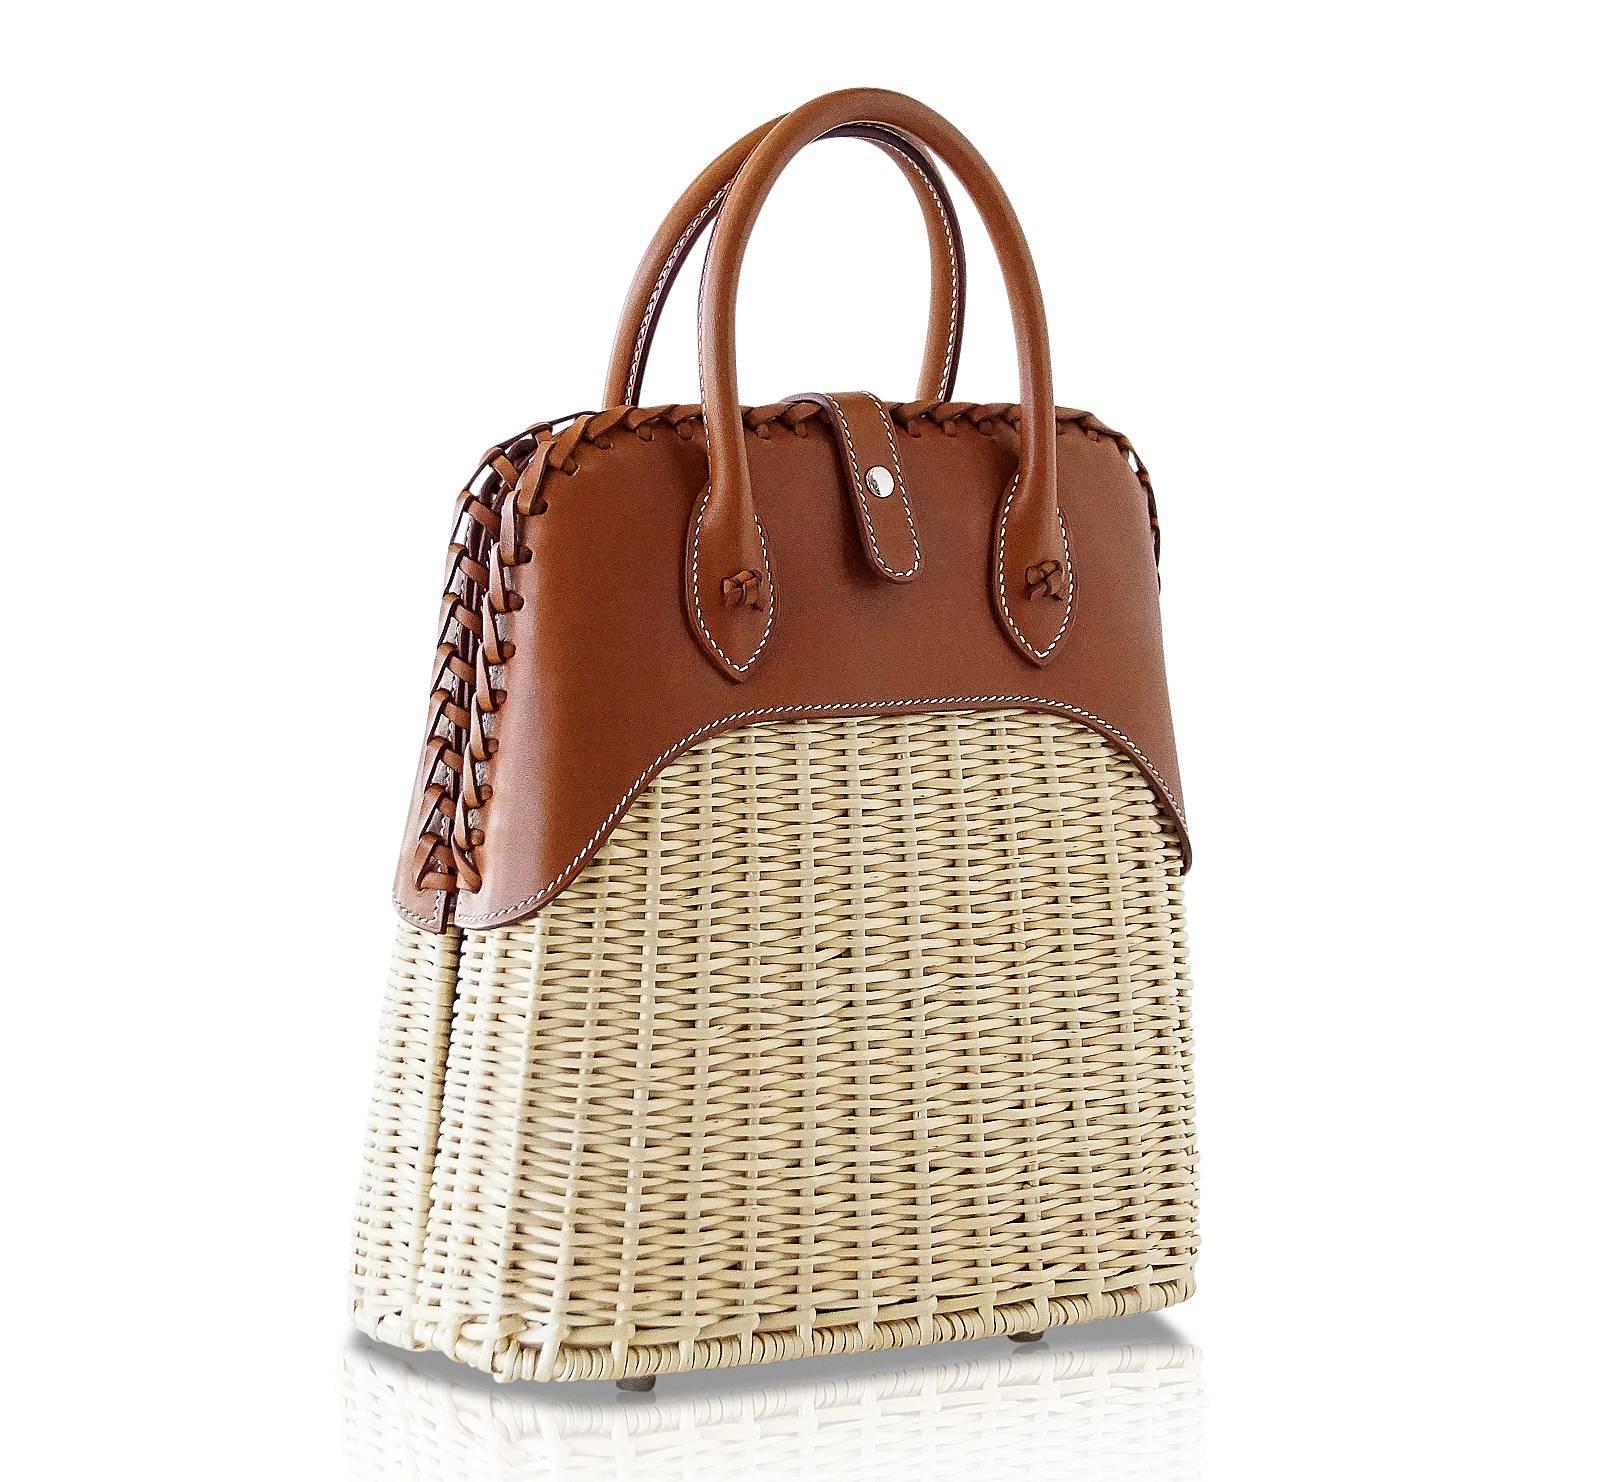 Mightychic offers a rare to find Limited Edition Hermes Picnic Bolide.
Light weight wicker and the warmth of Barenia leather.  The ultimate chic bag for any summer day - dress her up or down.
Top has a beautifully braided edge.
Front closure is the